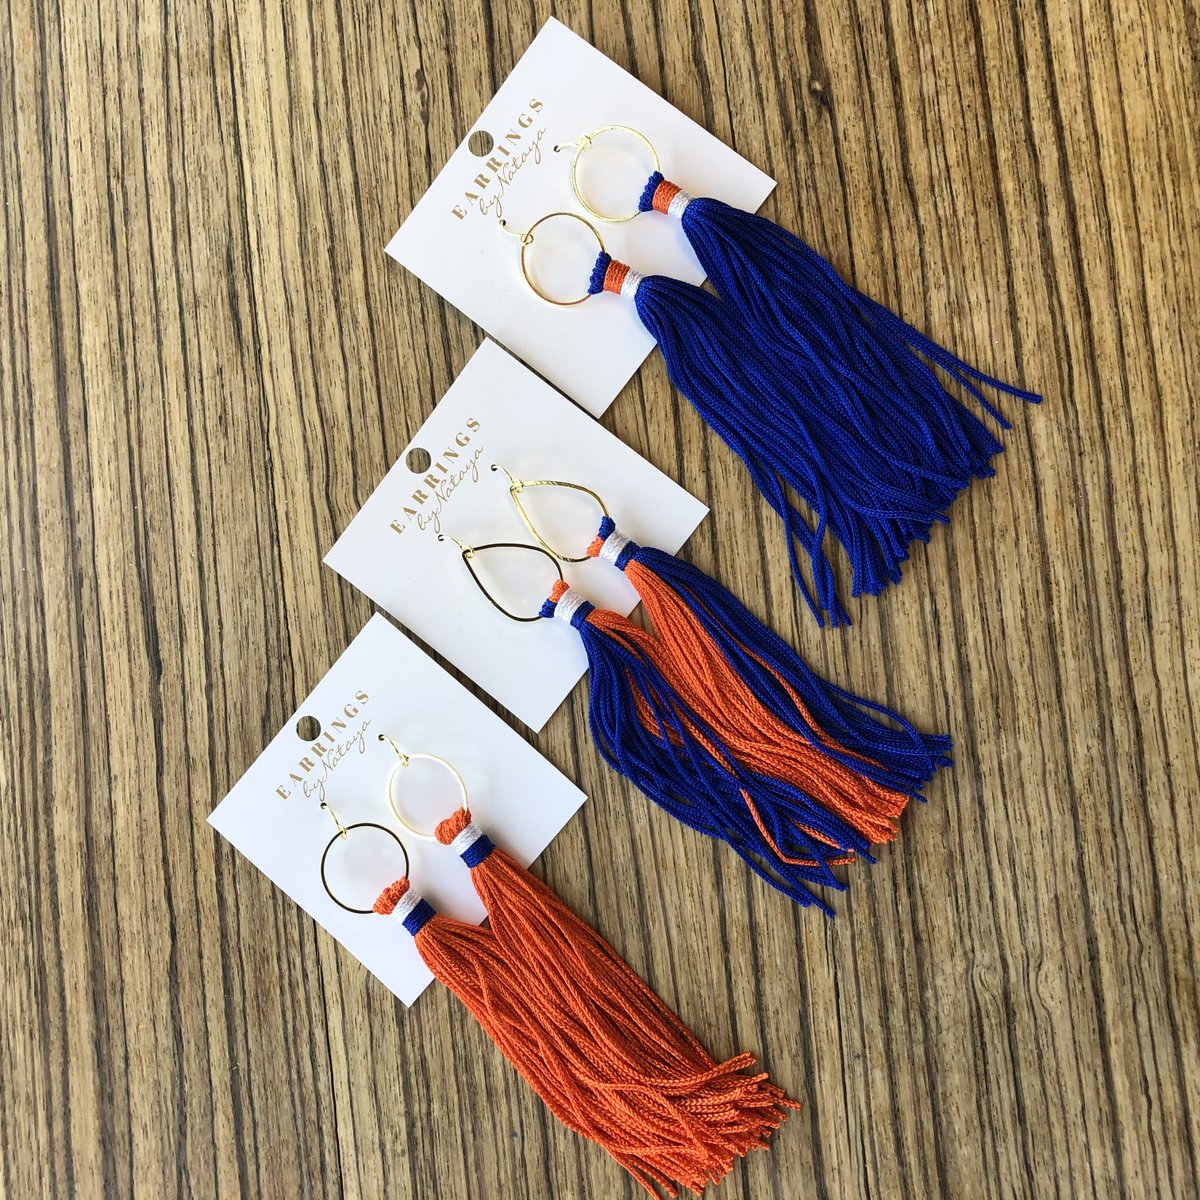 Hey #Oilersnation! Level up your team spirit with byNataya's fierce Oilers-themed fringe earrings and Jan's whimsical illustrations! #letsgooilers #yegmakers #yeg 🏒🎨